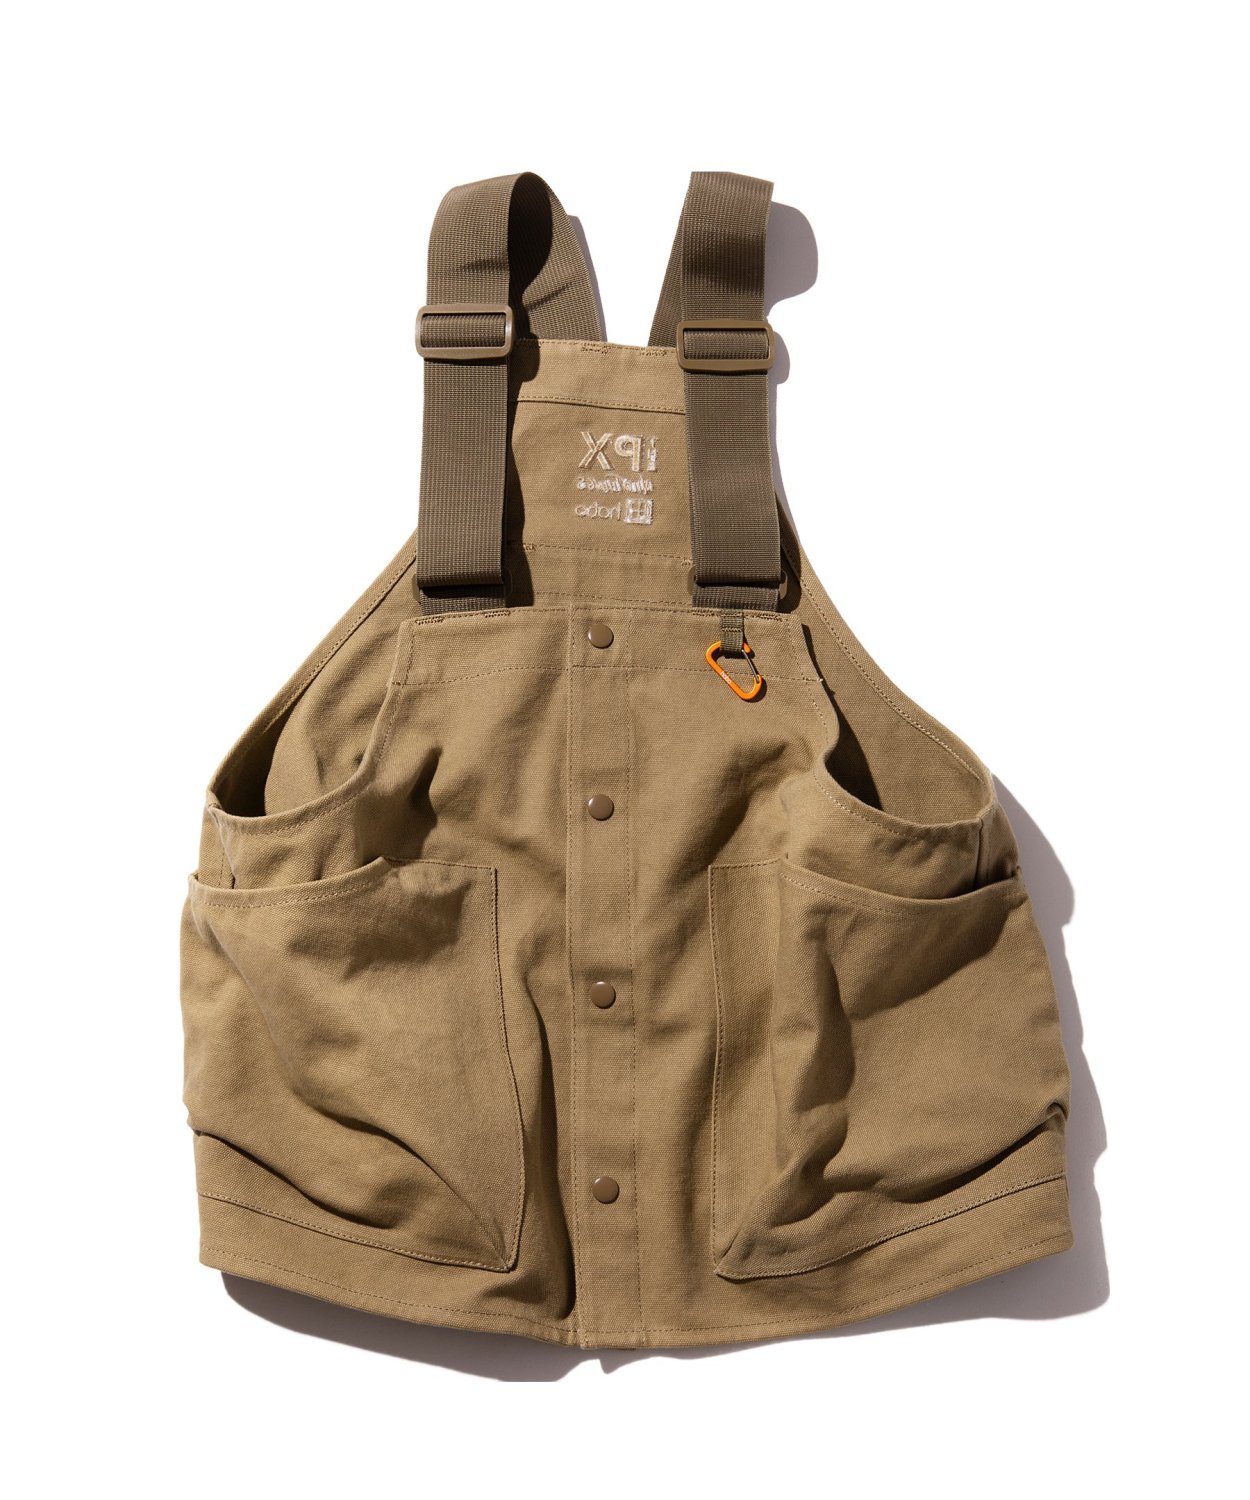 THE PX WILD THINGS  HOBO / PLAY VEST COTTON CANVAS VINTAGE WASH